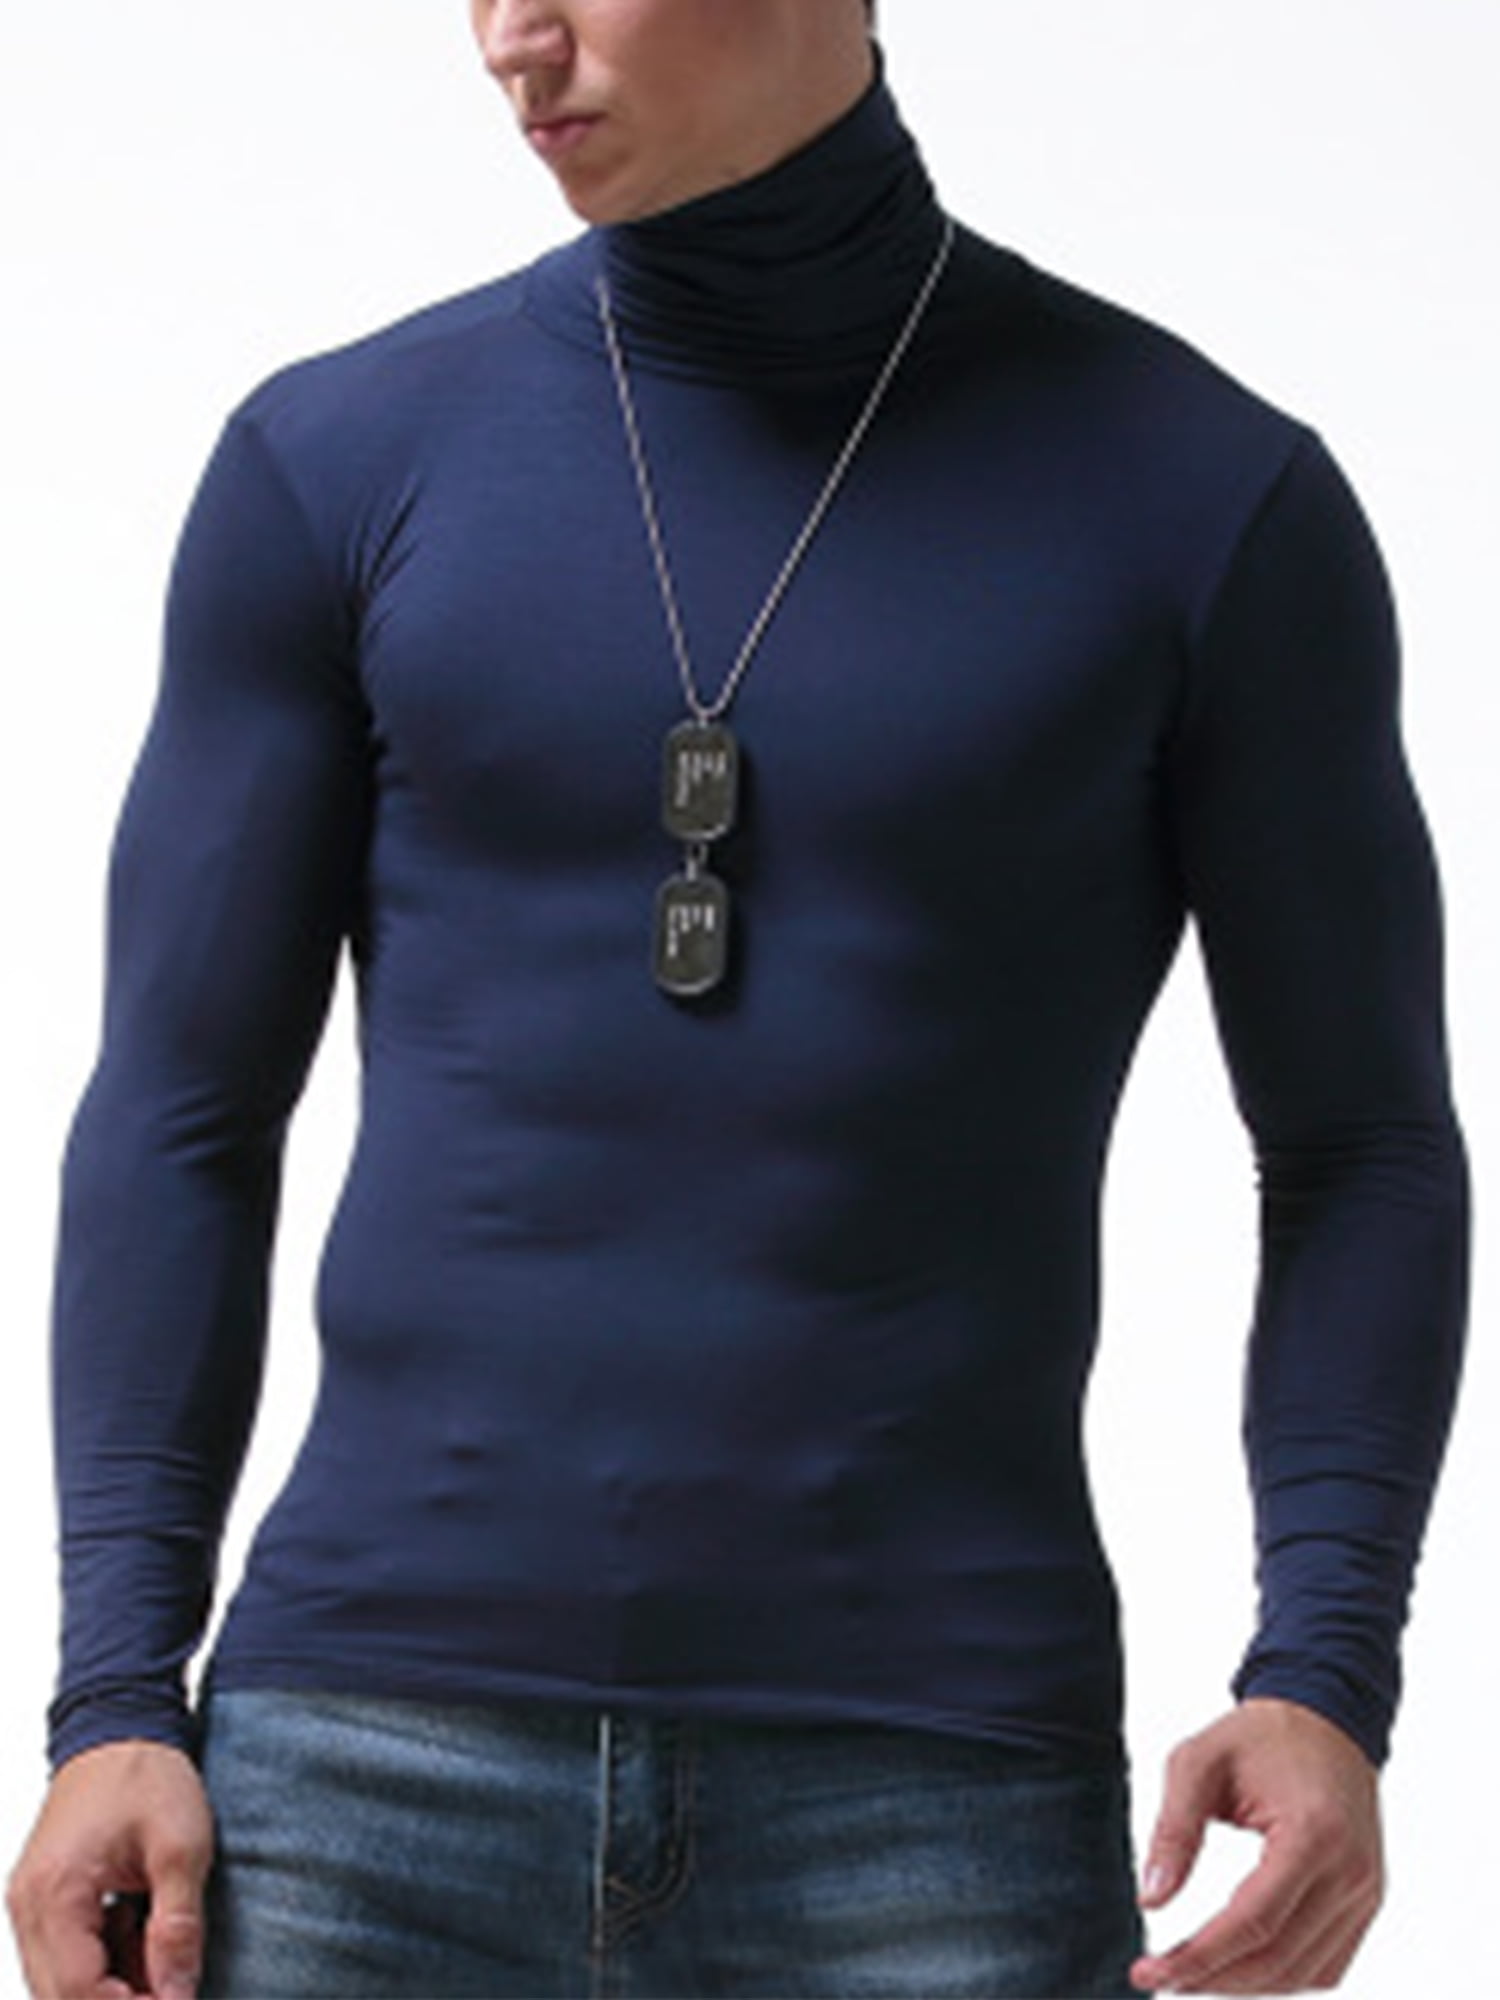 Mens Camo Shirts Long Sleeve Casual Crew Neck Hip Hop Fashion Muscle Tee T-Shirt Tops Blouse Pullover Jumper Sweatshirts 